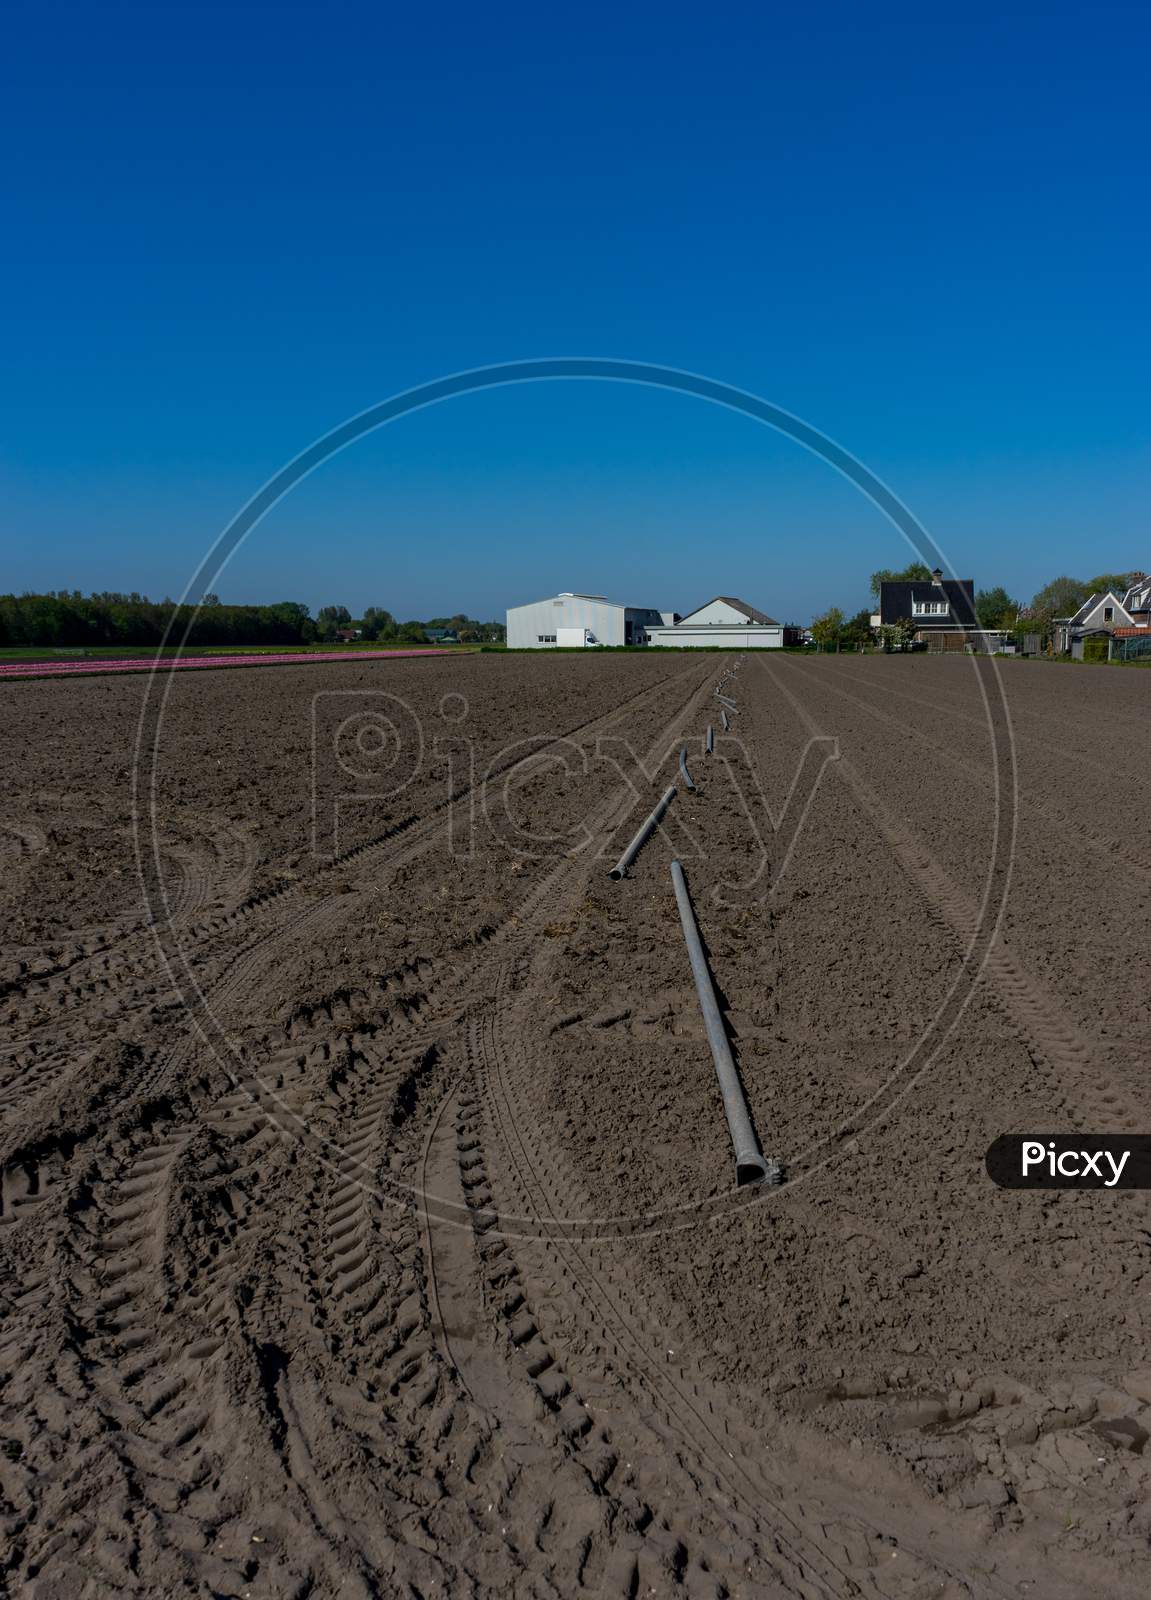 Lisse, Netherlands - 5 May 2018:  Tractor Tyre  Marks On A Tulip Field